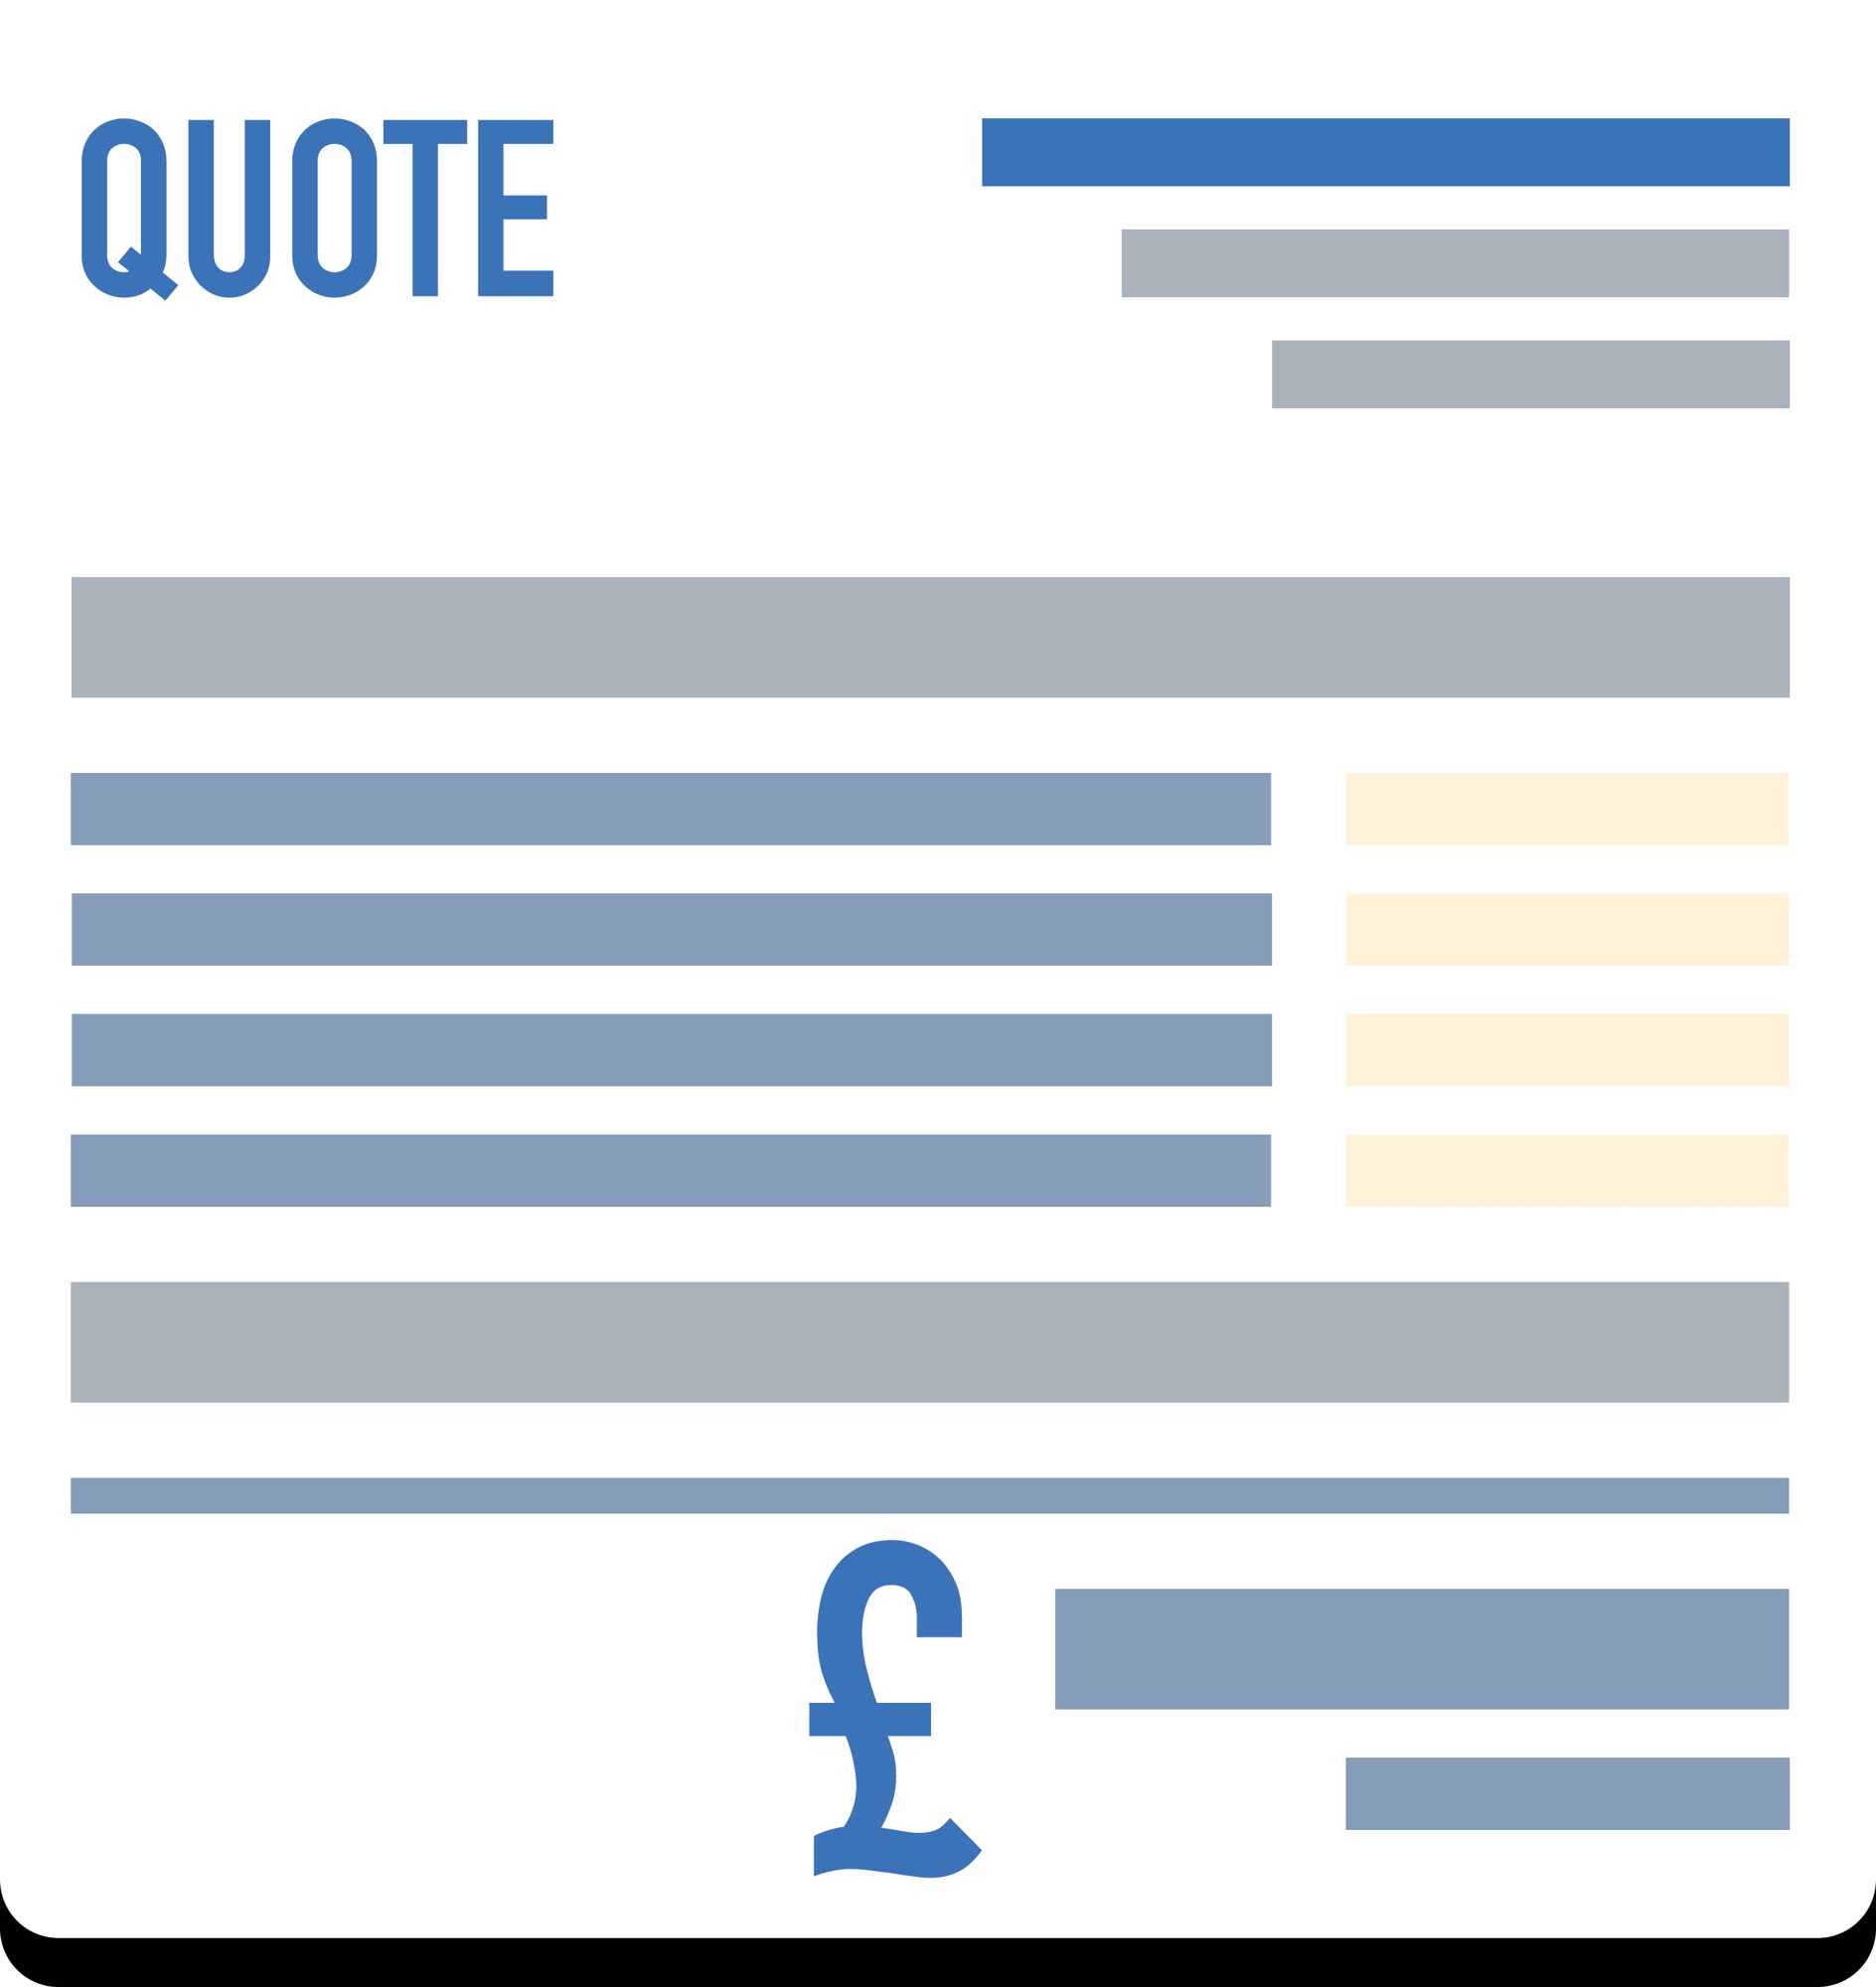 Quote template for builders